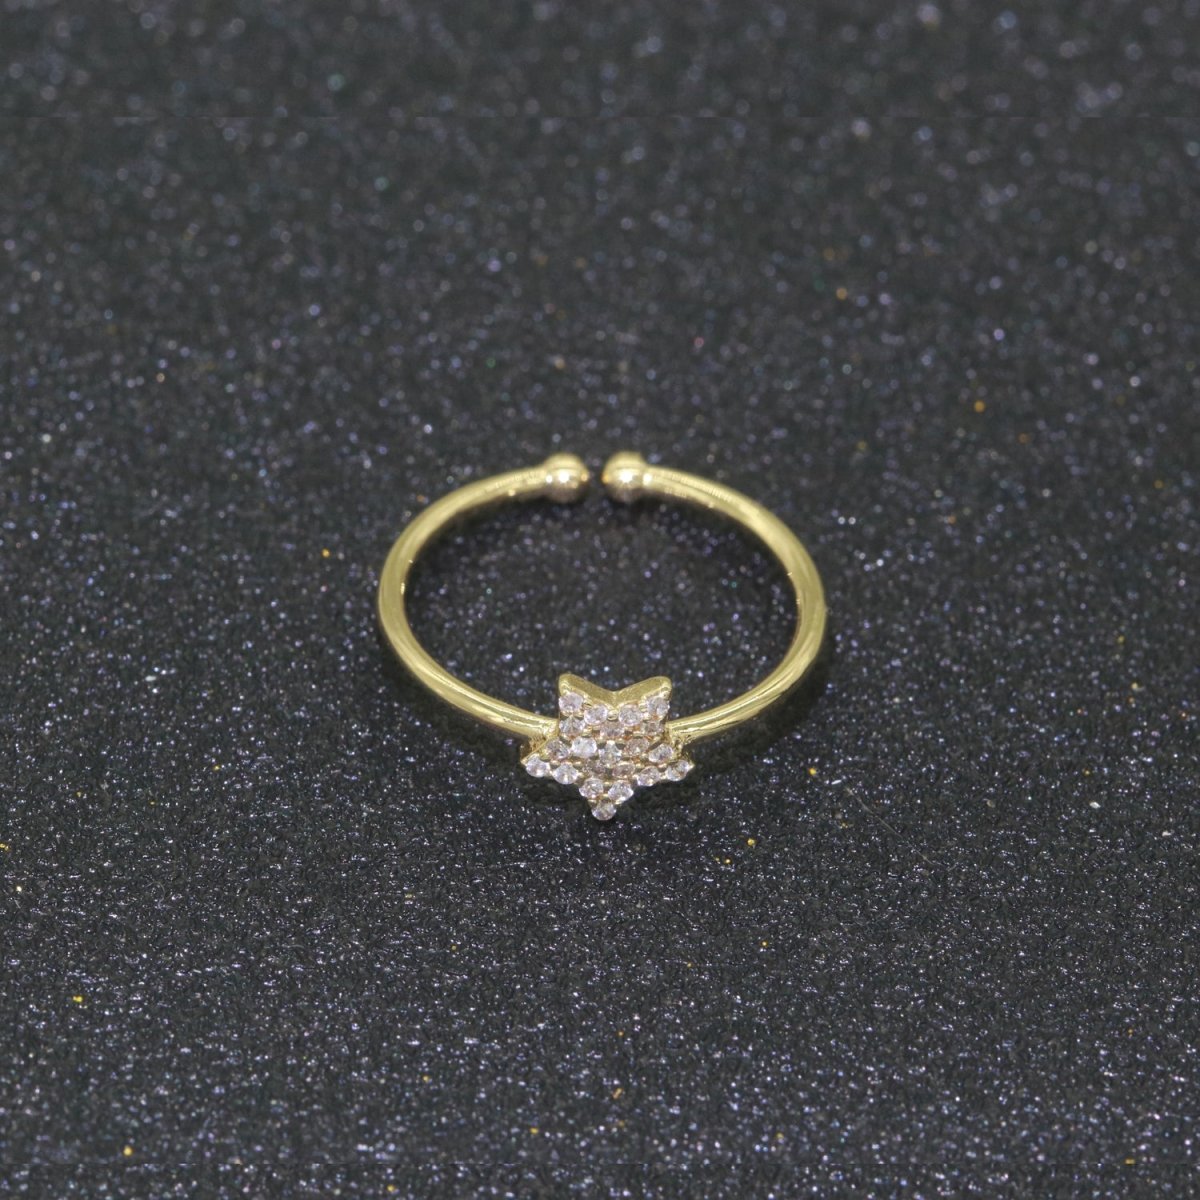 Dainty Gold Star Stacking Ring - minimalist dainty everyday delicate ring, thin knuckle ring, midi ring Open Adjustable Celestial Ring O-362 - DLUXCA